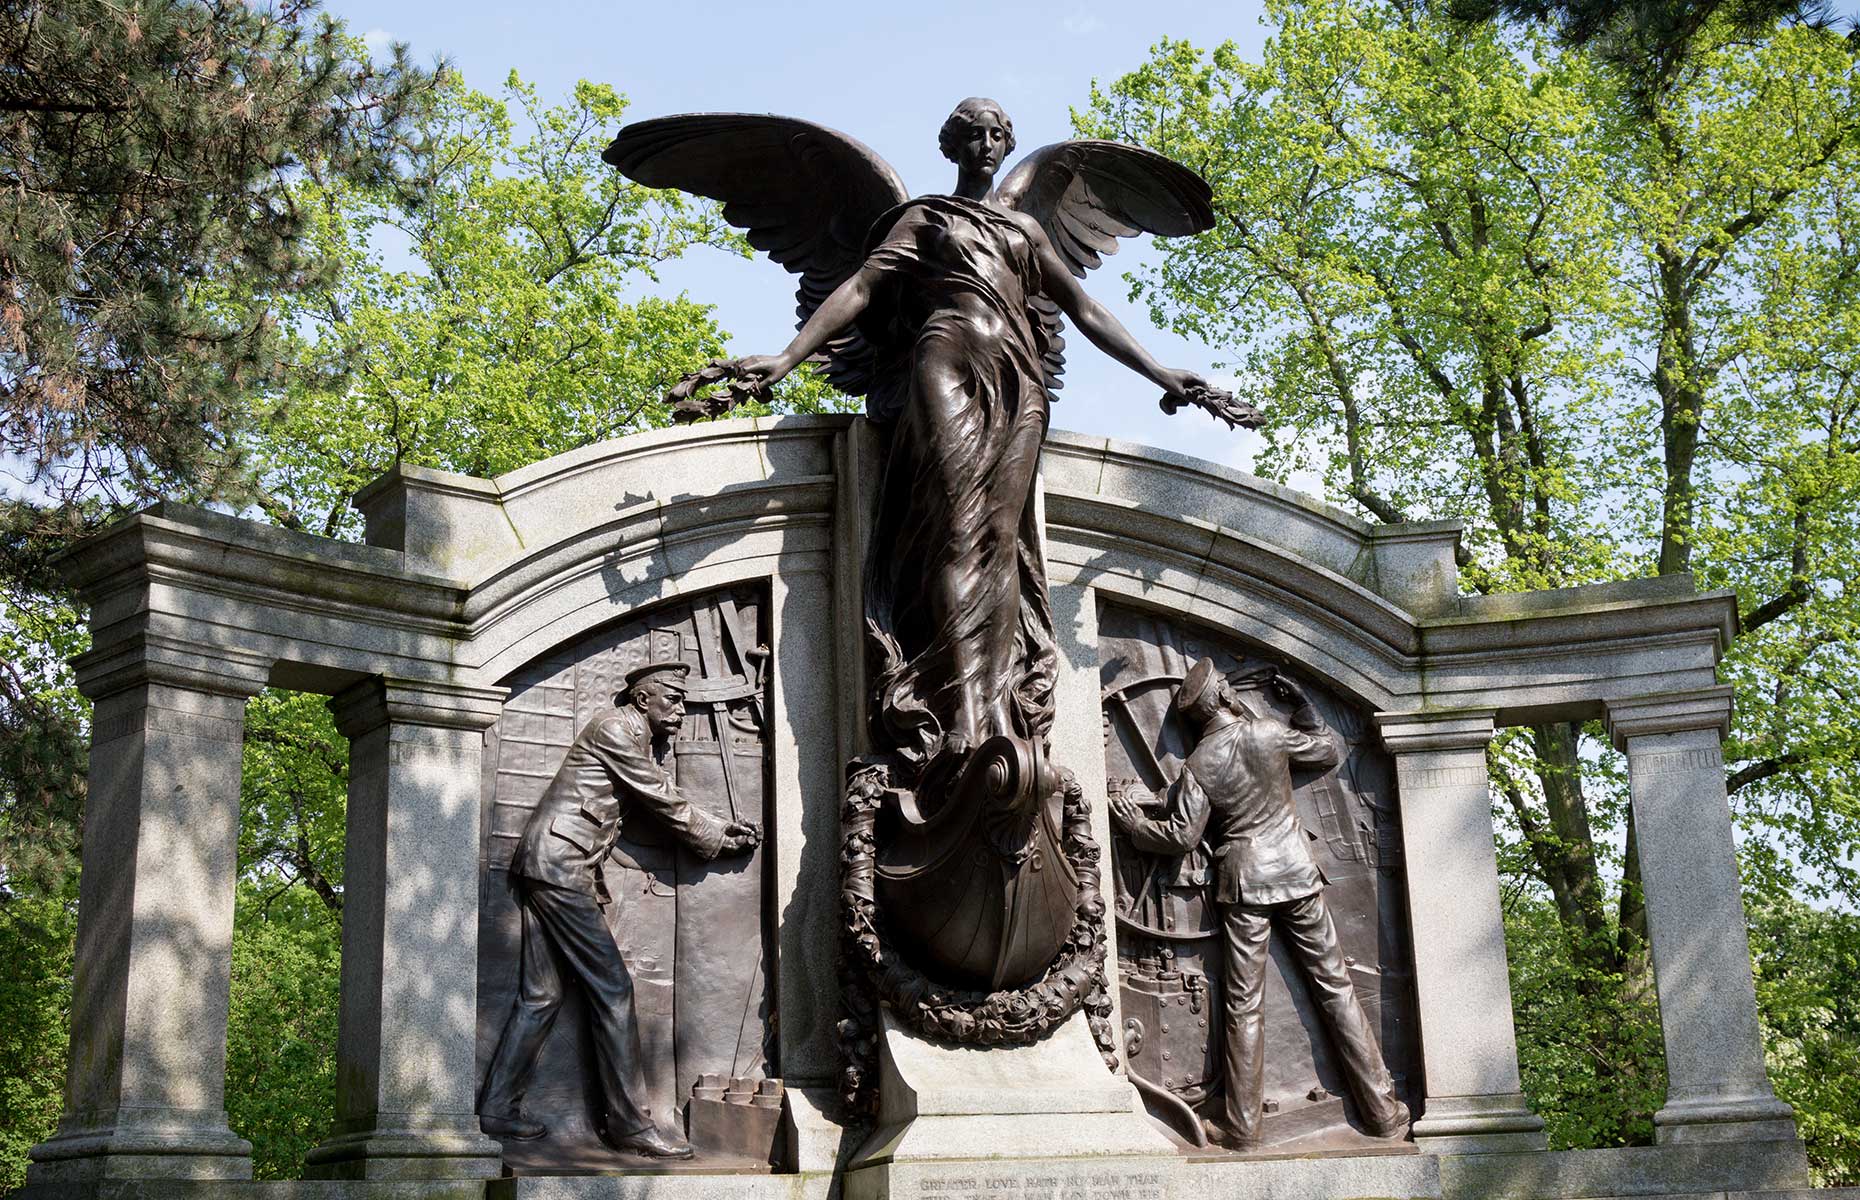 Titanic Engineer Officers' Memorial, Southampton, part of the Titanic trail. The monument features the winged goddess Nike (Image: Ben Gingell/Shutterstock)